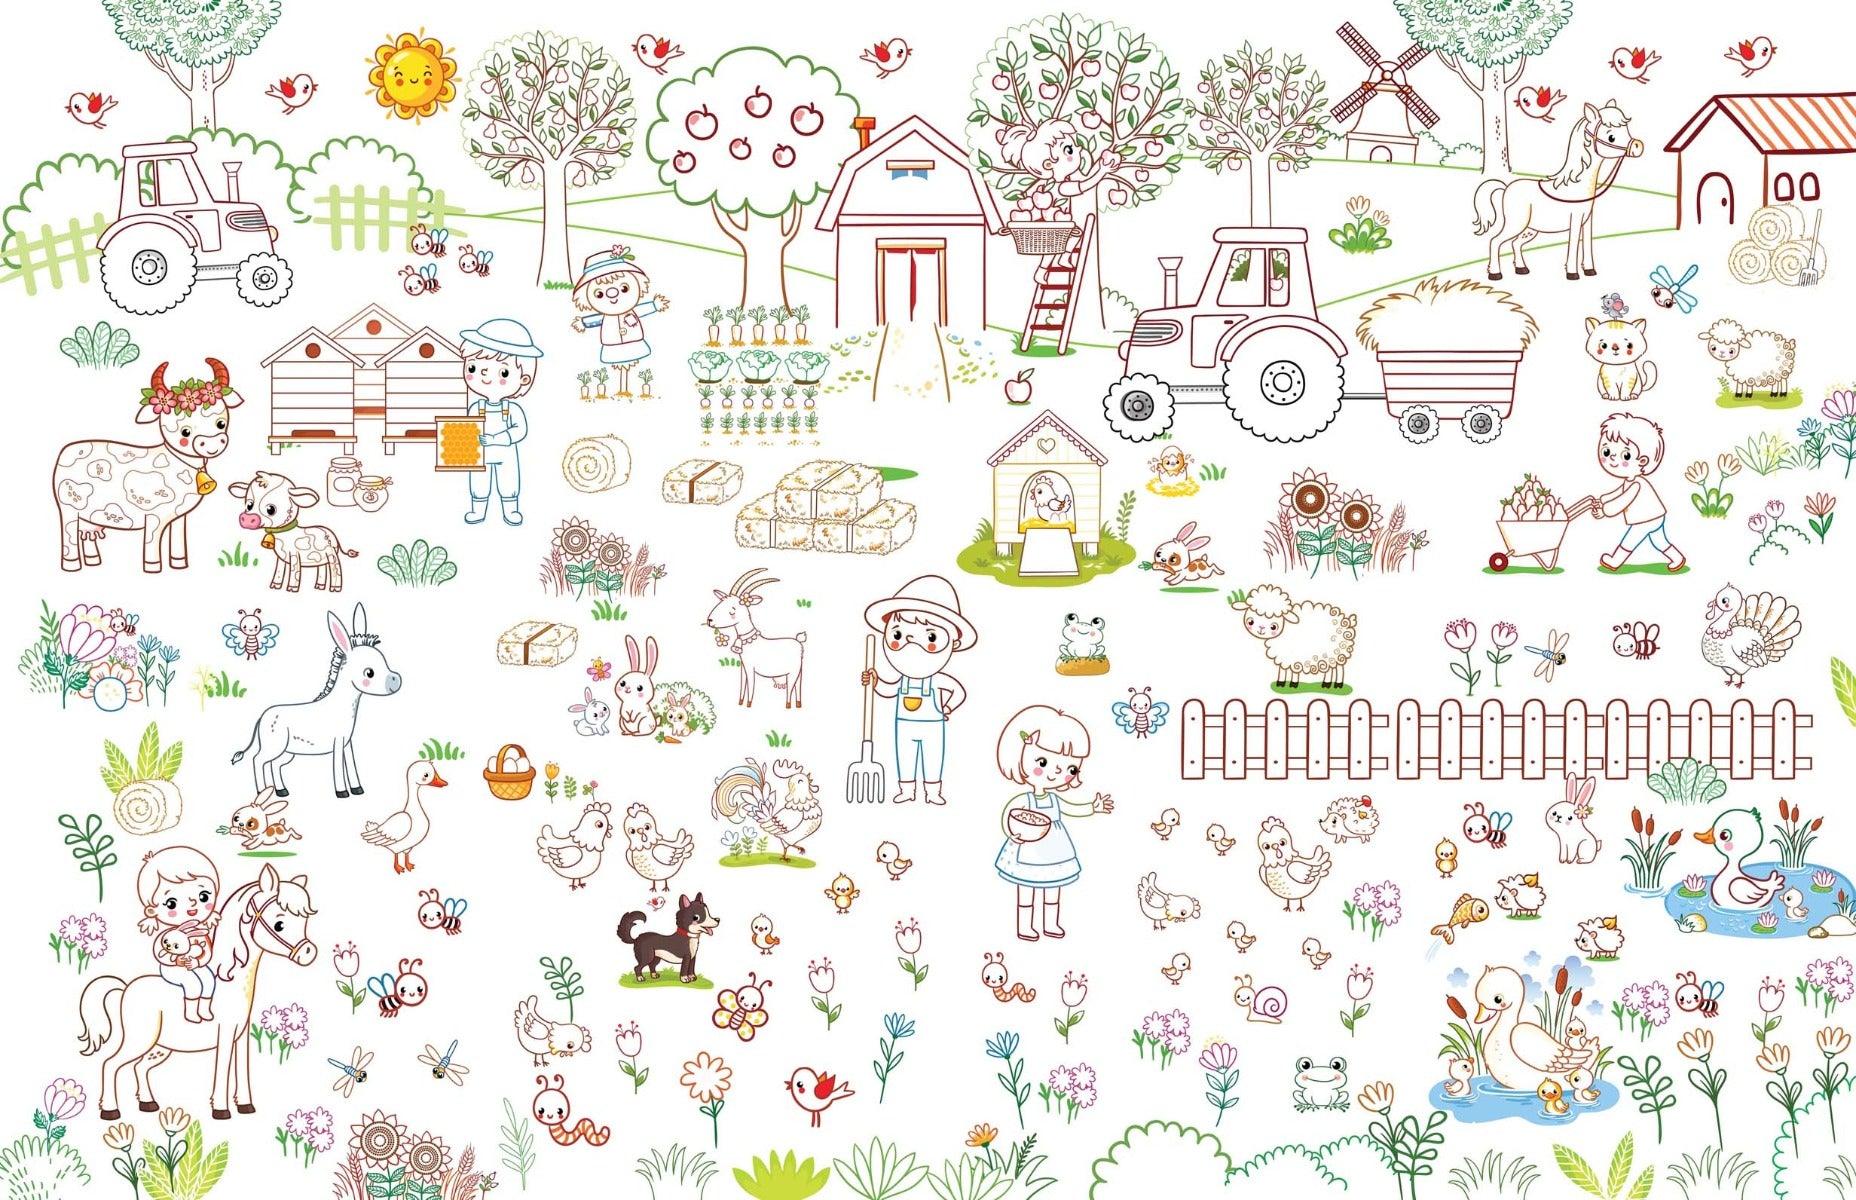 Dreamland Pop-Out At the Farm With 3D Models Colouring Stickers - An Interactive & Activity Book For Kids (English)